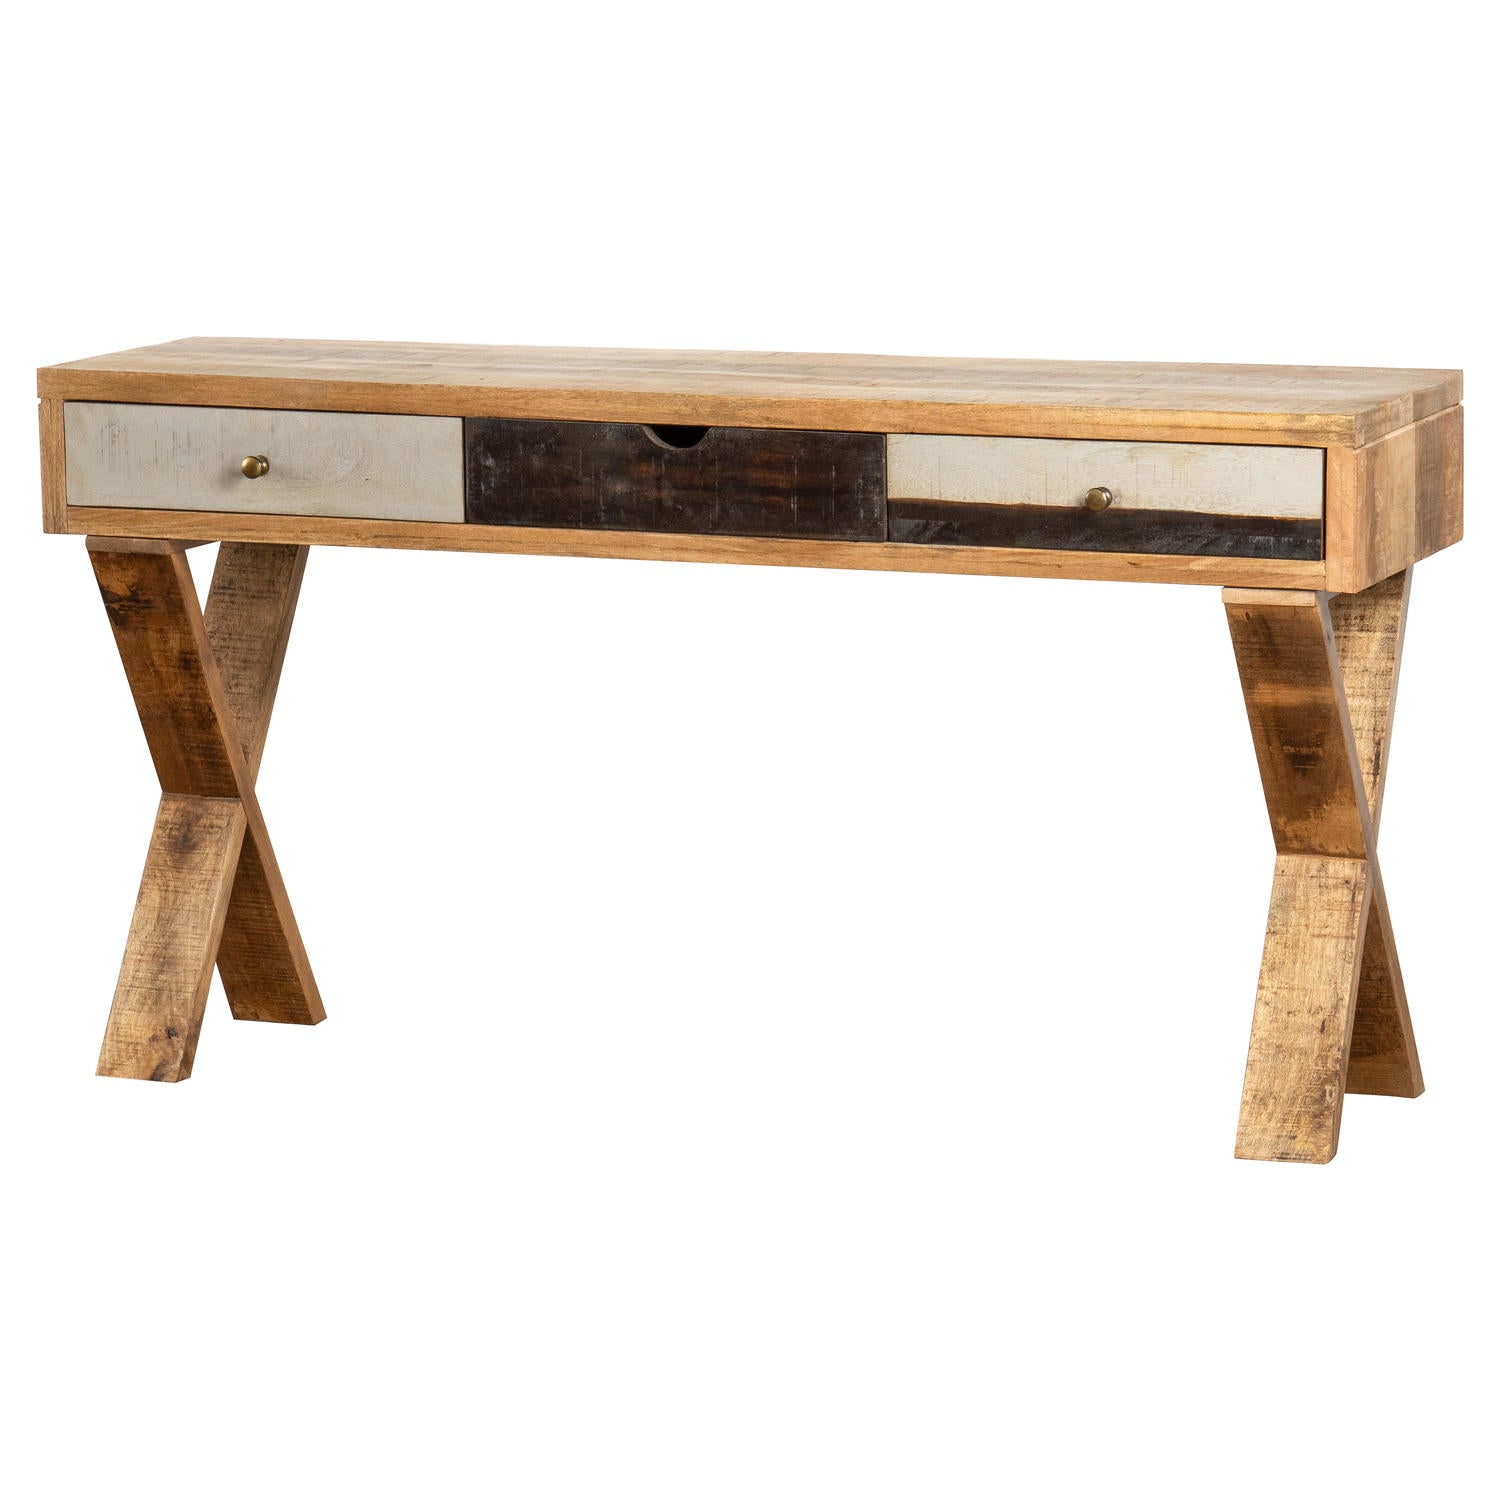 Storia Reclaimed Industrial Console With Cross Leg